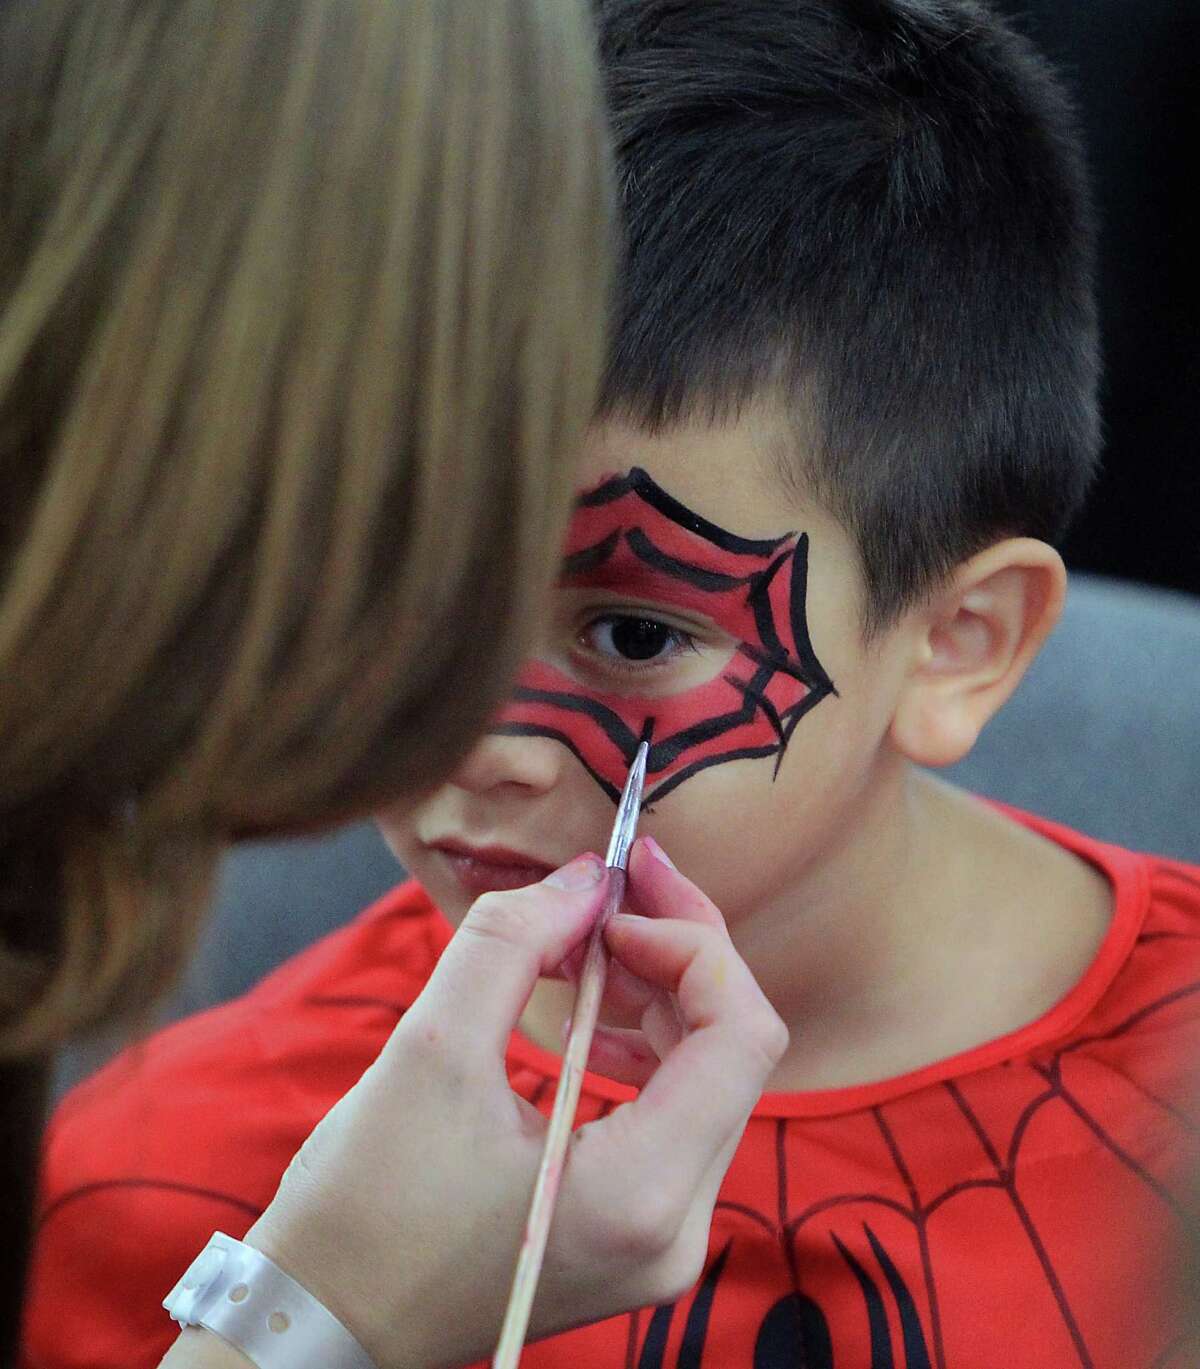 Four-year-old Michael Thornton has his face painted during the Amazing Houston Comic Con convention at George R Brown Convention Center Sunday, Aug. 31, 2014, in Houston.